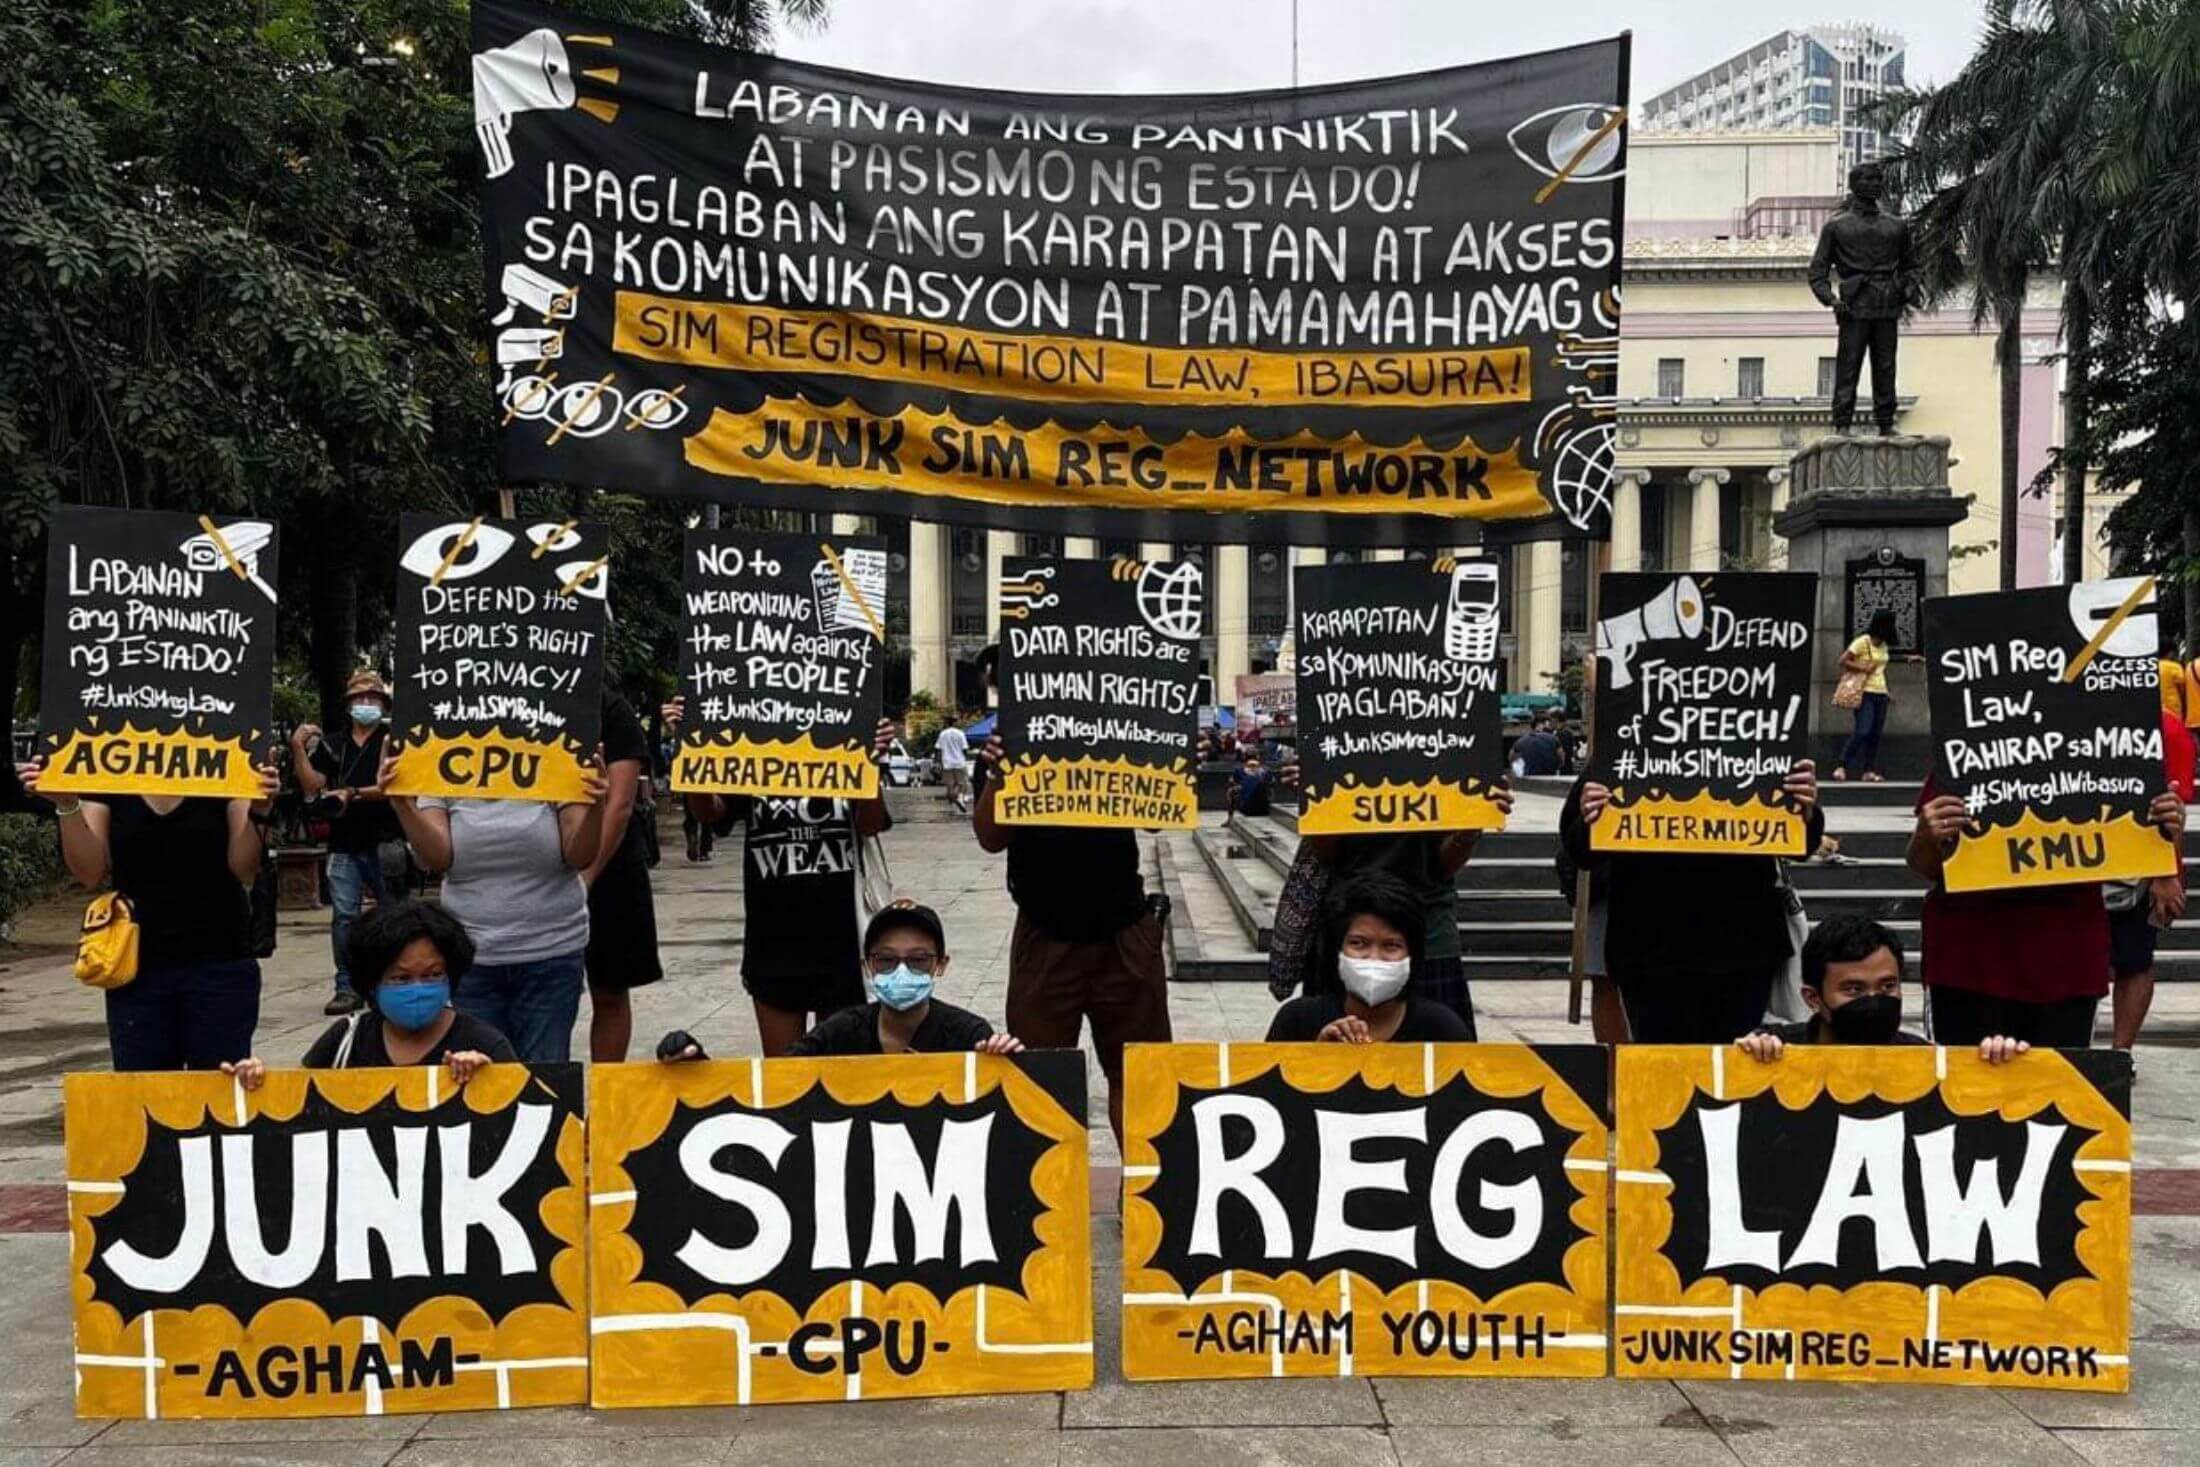 Eleven people hold black and yellow signs with white slogans written on them in Filipino and English at a demonstration in an outside plaza. Four of the people are kneeling and seven are standing behind them.